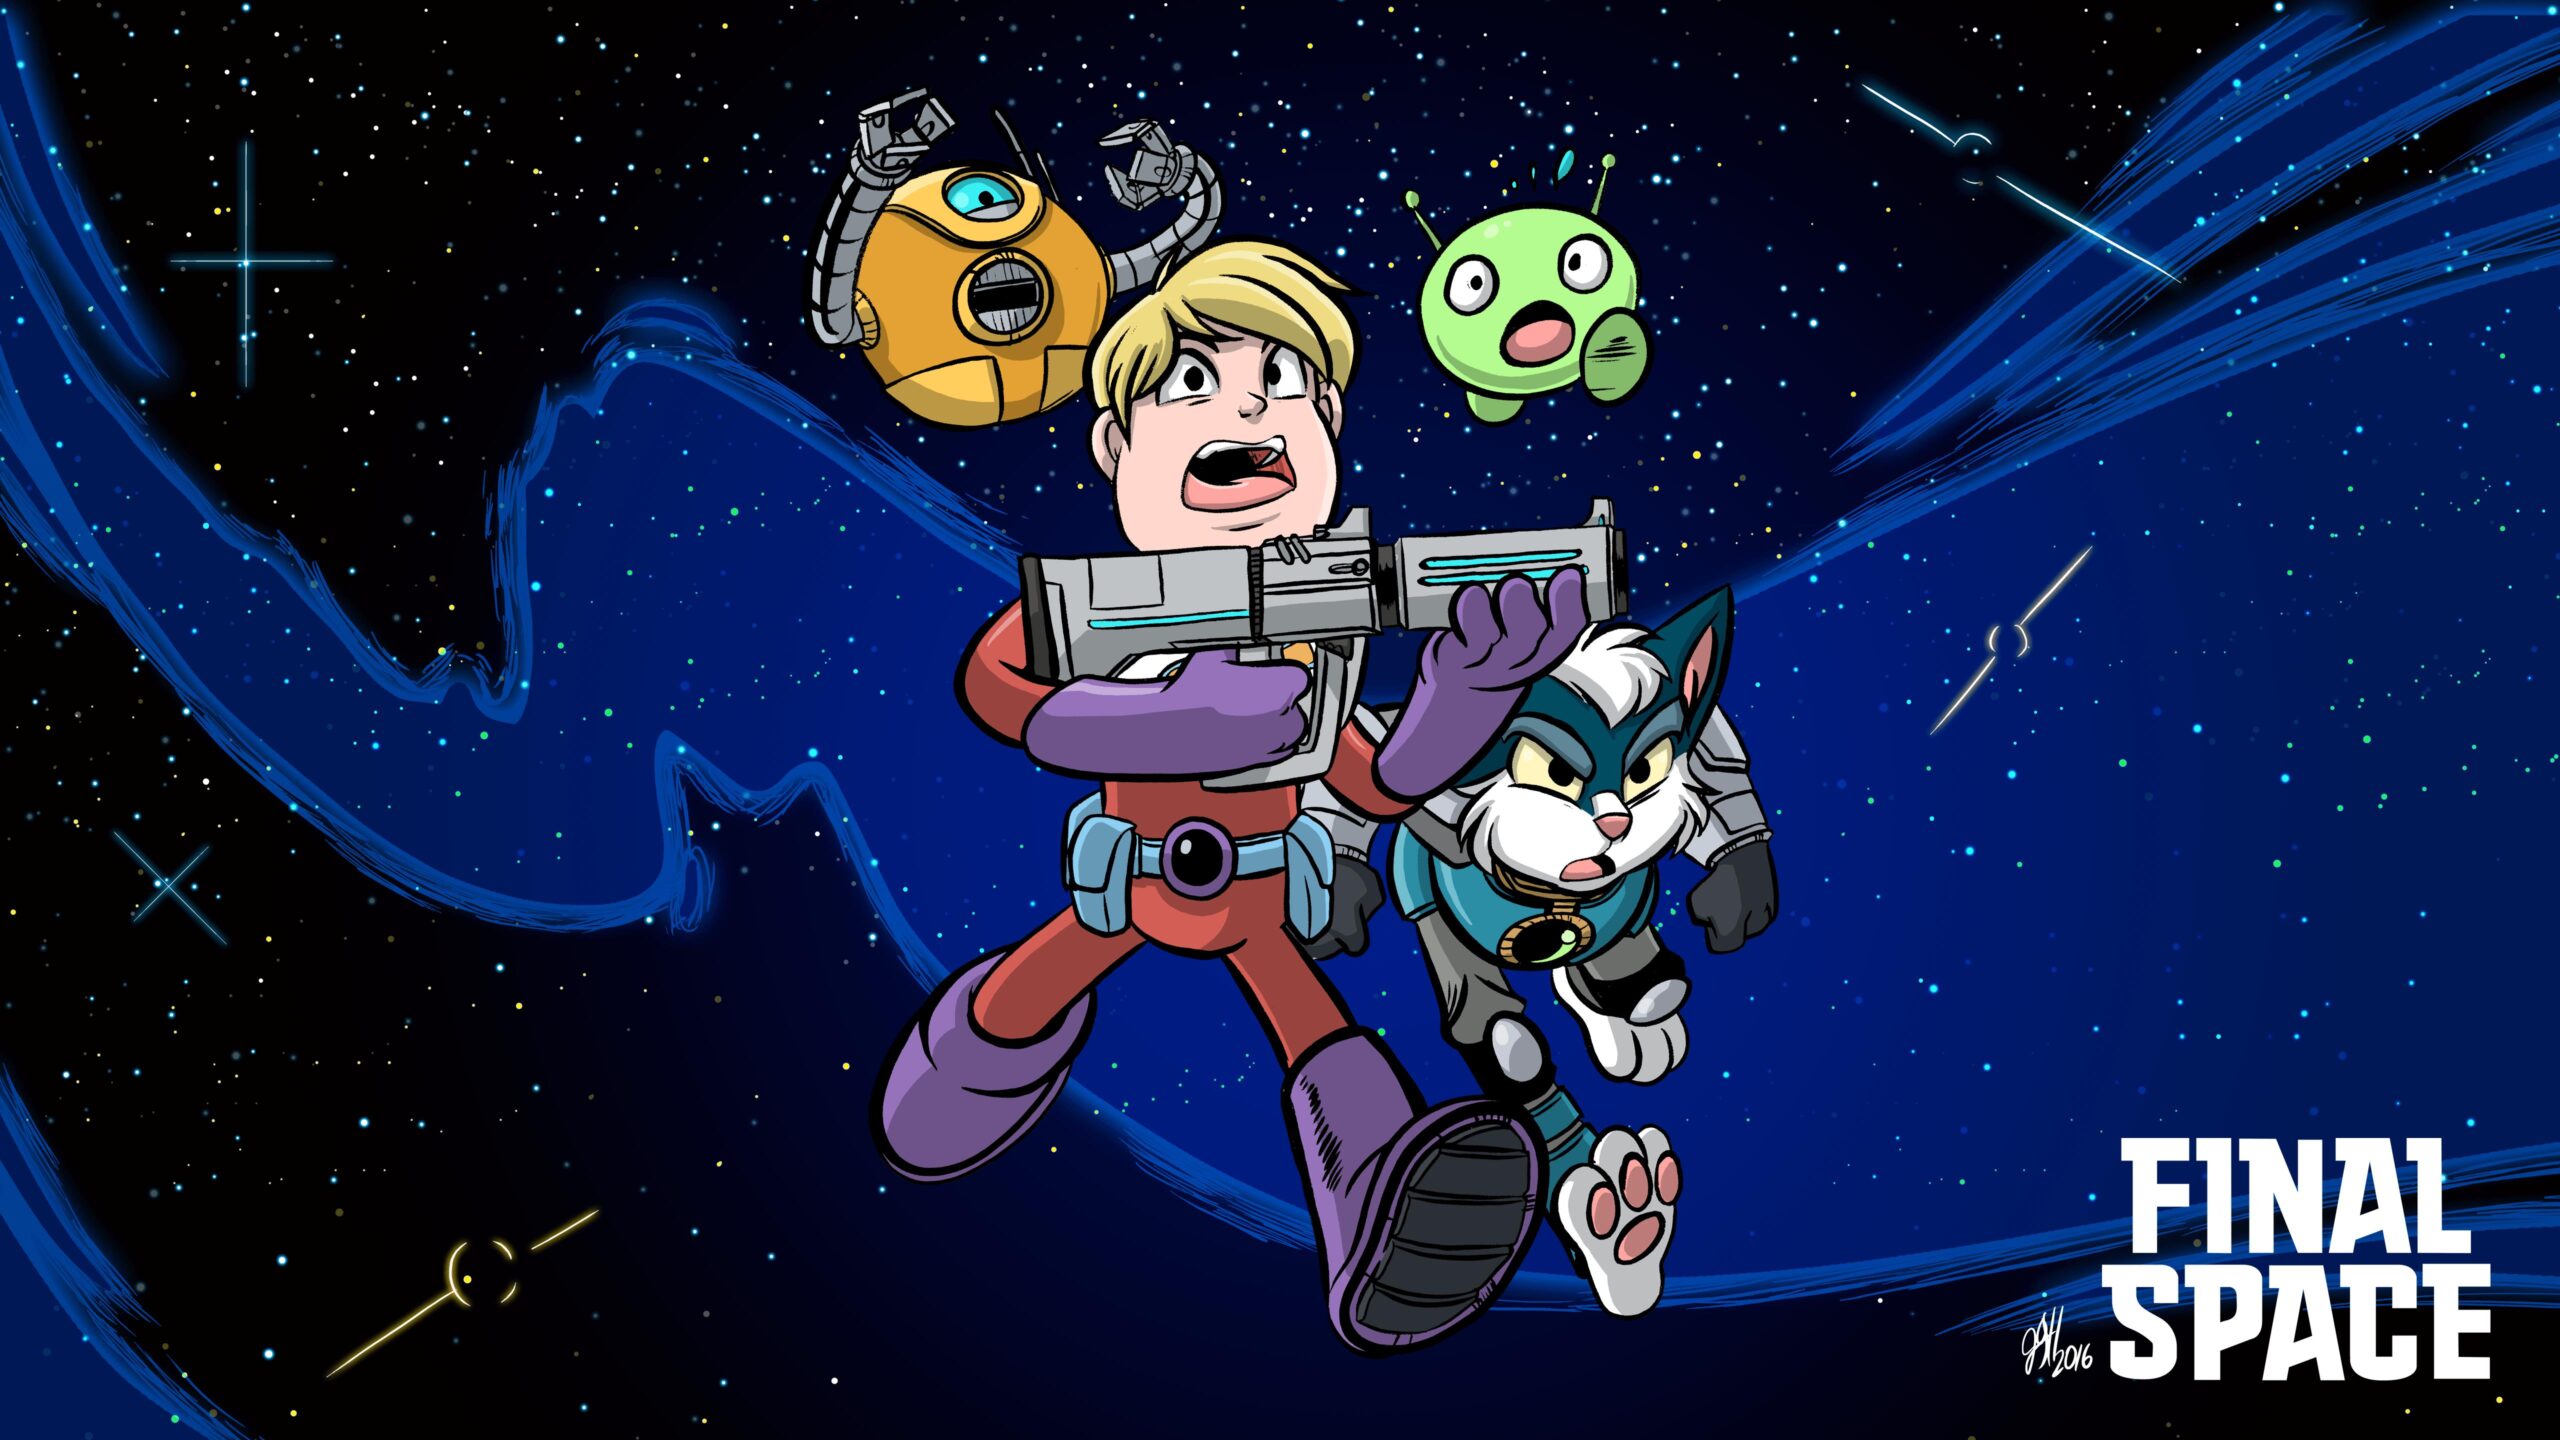 Final Space Wallpaper For Pc, Final Space, Cartoons